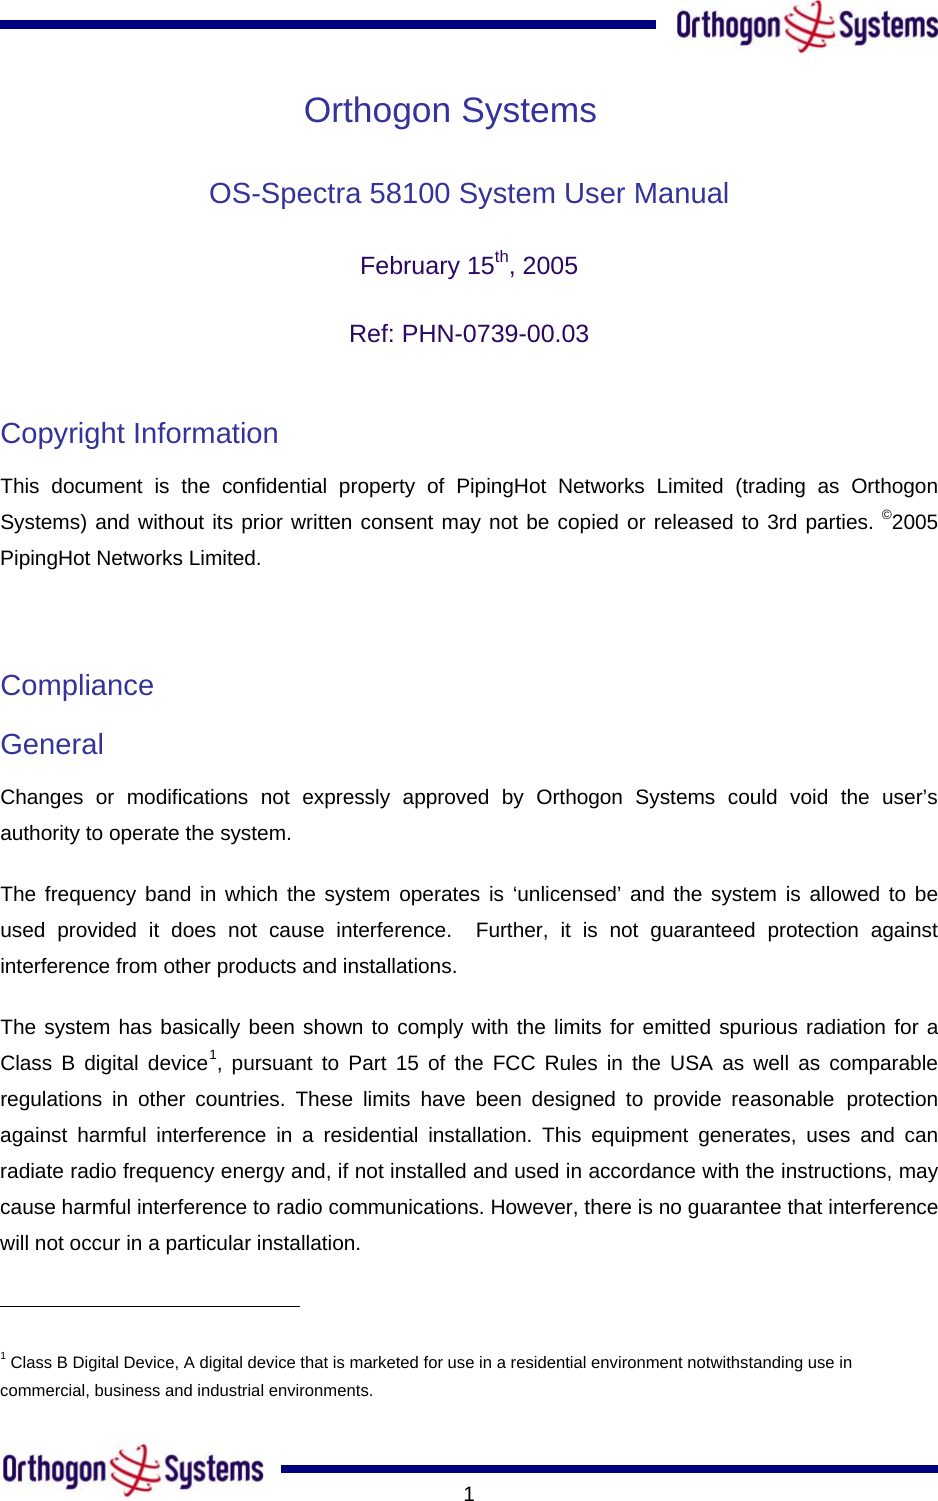       1Orthogon Systems OS-Spectra 58100 System User Manual  February 15th, 2005 Ref: PHN-0739-00.03  Copyright Information  This document is the confidential property of PipingHot Networks Limited (trading as Orthogon Systems) and without its prior written consent may not be copied or released to 3rd parties. ©2005 PipingHot Networks Limited.   Compliance  General Changes or modifications not expressly approved by Orthogon Systems could void the user’s authority to operate the system.  The frequency band in which the system operates is ‘unlicensed’ and the system is allowed to be used provided it does not cause interference.  Further, it is not guaranteed protection against interference from other products and installations. The system has basically been shown to comply with the limits for emitted spurious radiation for a Class B digital device1, pursuant to Part 15 of the FCC Rules in the USA as well as comparable regulations in other countries. These limits have been designed to provide reasonable protection against harmful interference in a residential installation. This equipment generates, uses and can radiate radio frequency energy and, if not installed and used in accordance with the instructions, may cause harmful interference to radio communications. However, there is no guarantee that interference will not occur in a particular installation.                                                        1 Class B Digital Device, A digital device that is marketed for use in a residential environment notwithstanding use in commercial, business and industrial environments. 